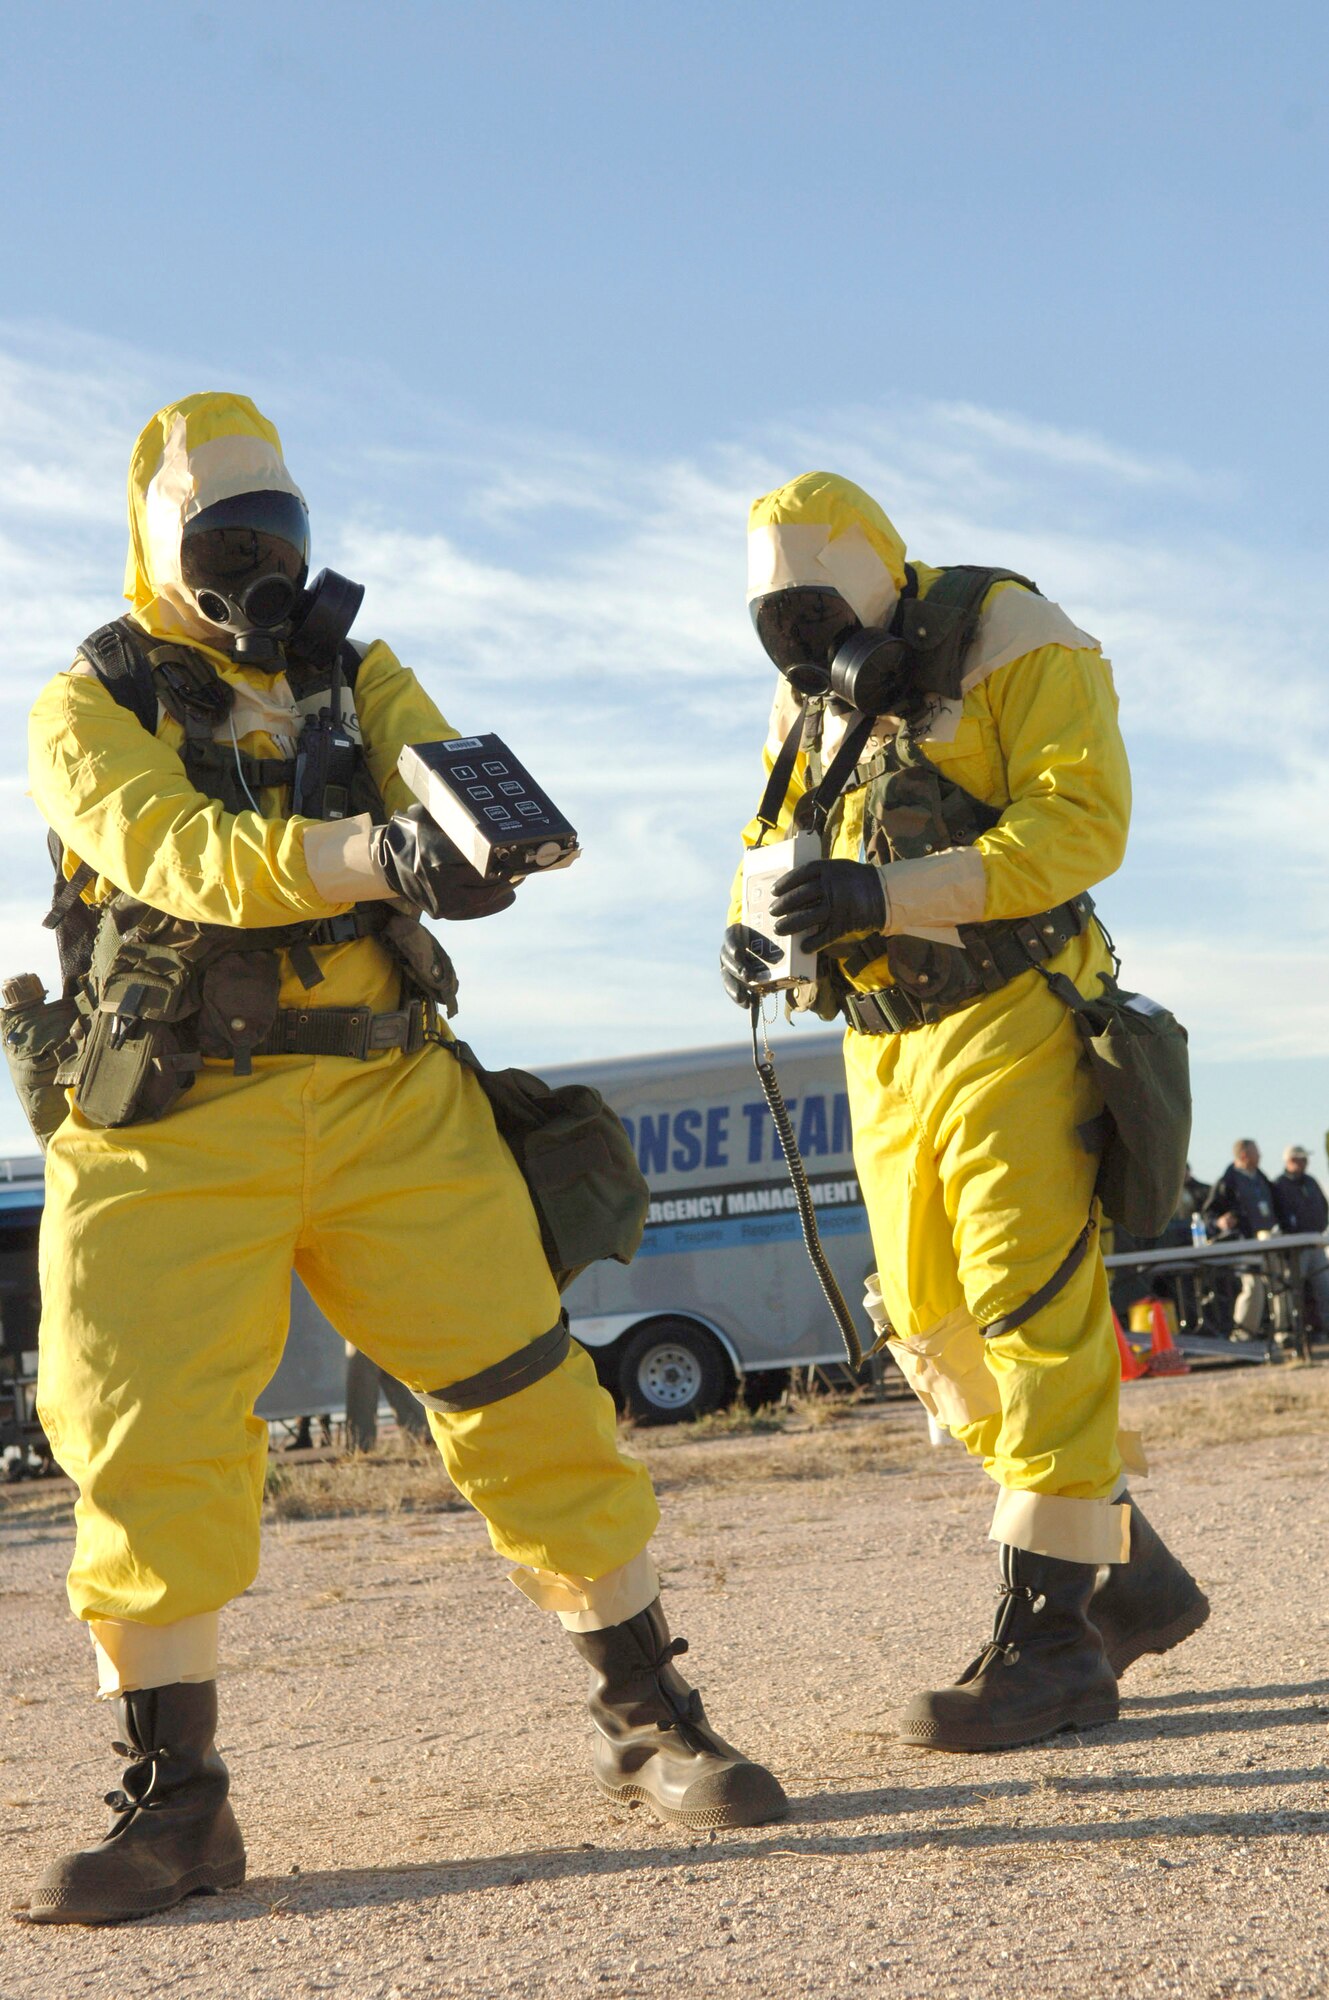 Airmen 1st Class Bryan Keith and Lawrence Ackerman check the area for contamination prior to setting up the contamination control station Dec. 4 at Davis-Monthan Air Force Base, Ariz., during Vigilant Shield 07. Vigilant Shield 07 is a joint nuclear weapon accident exercise designed to train Department of Defense and federal agencies on response efforts as a cohesive team. (U.S. Air Force photo/Senior Airman Christina D. Ponte)